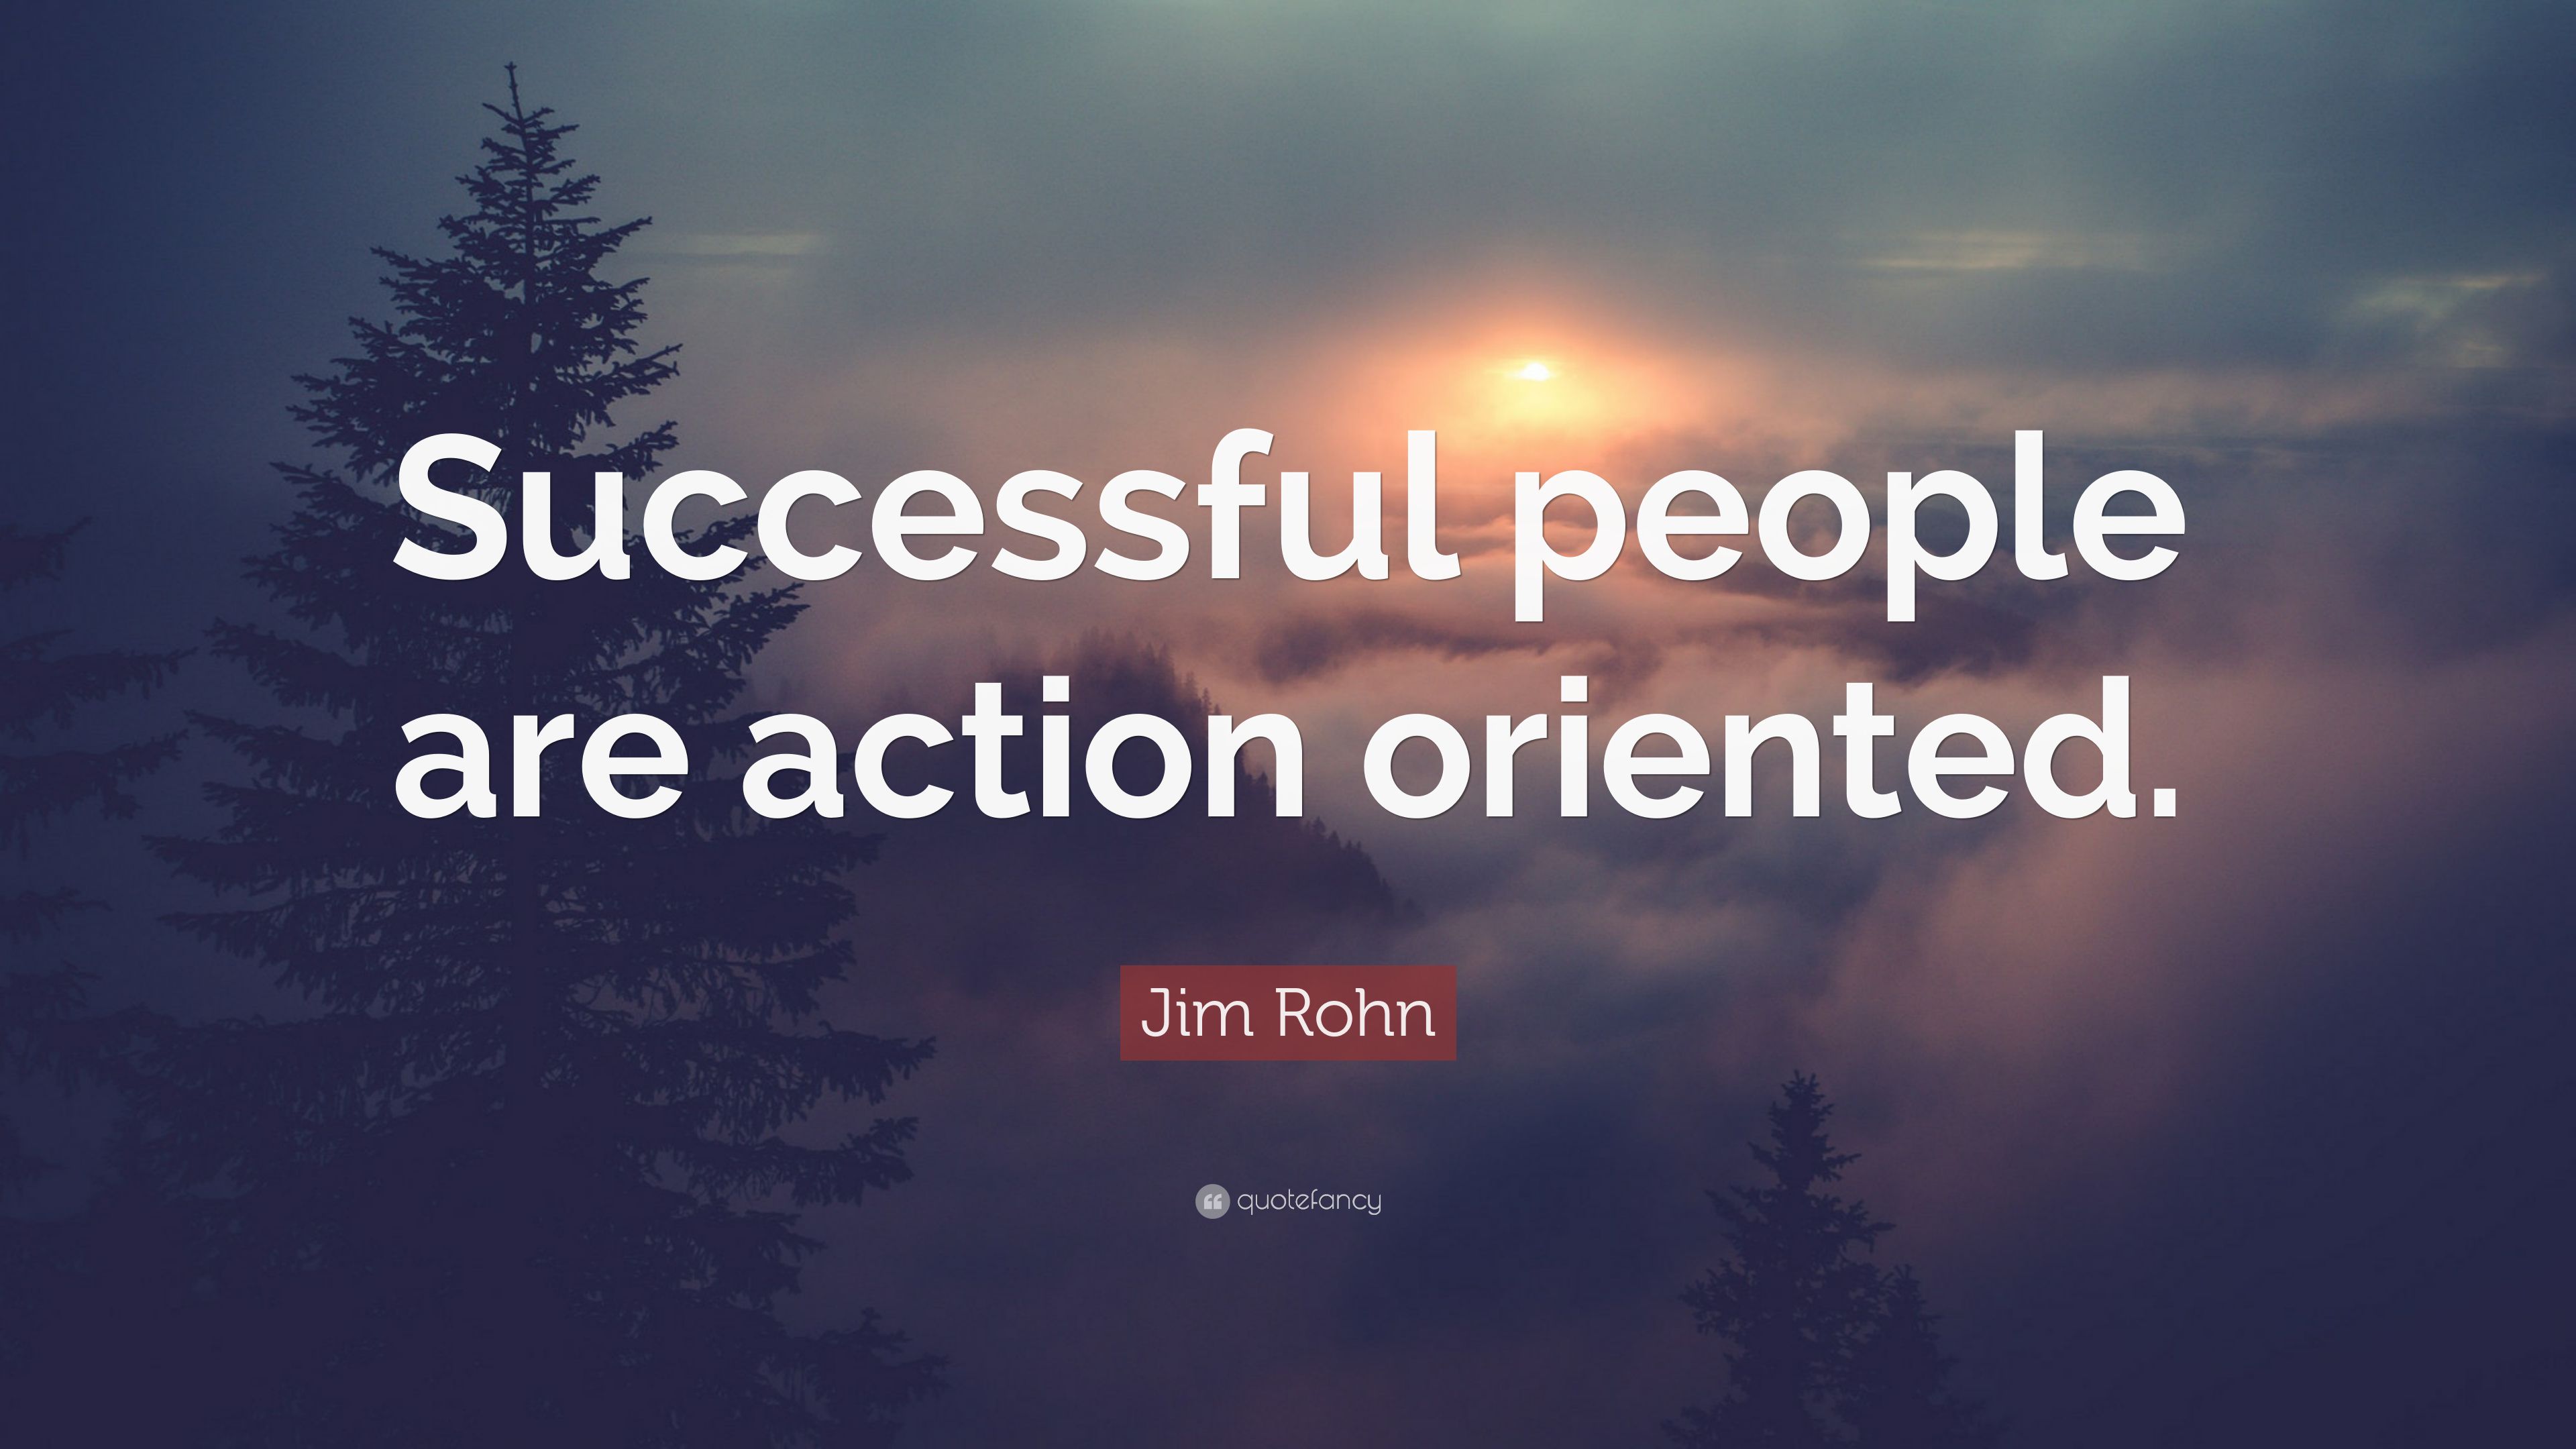 Jim Rohn Quote: “Successful people are action oriented.” 12